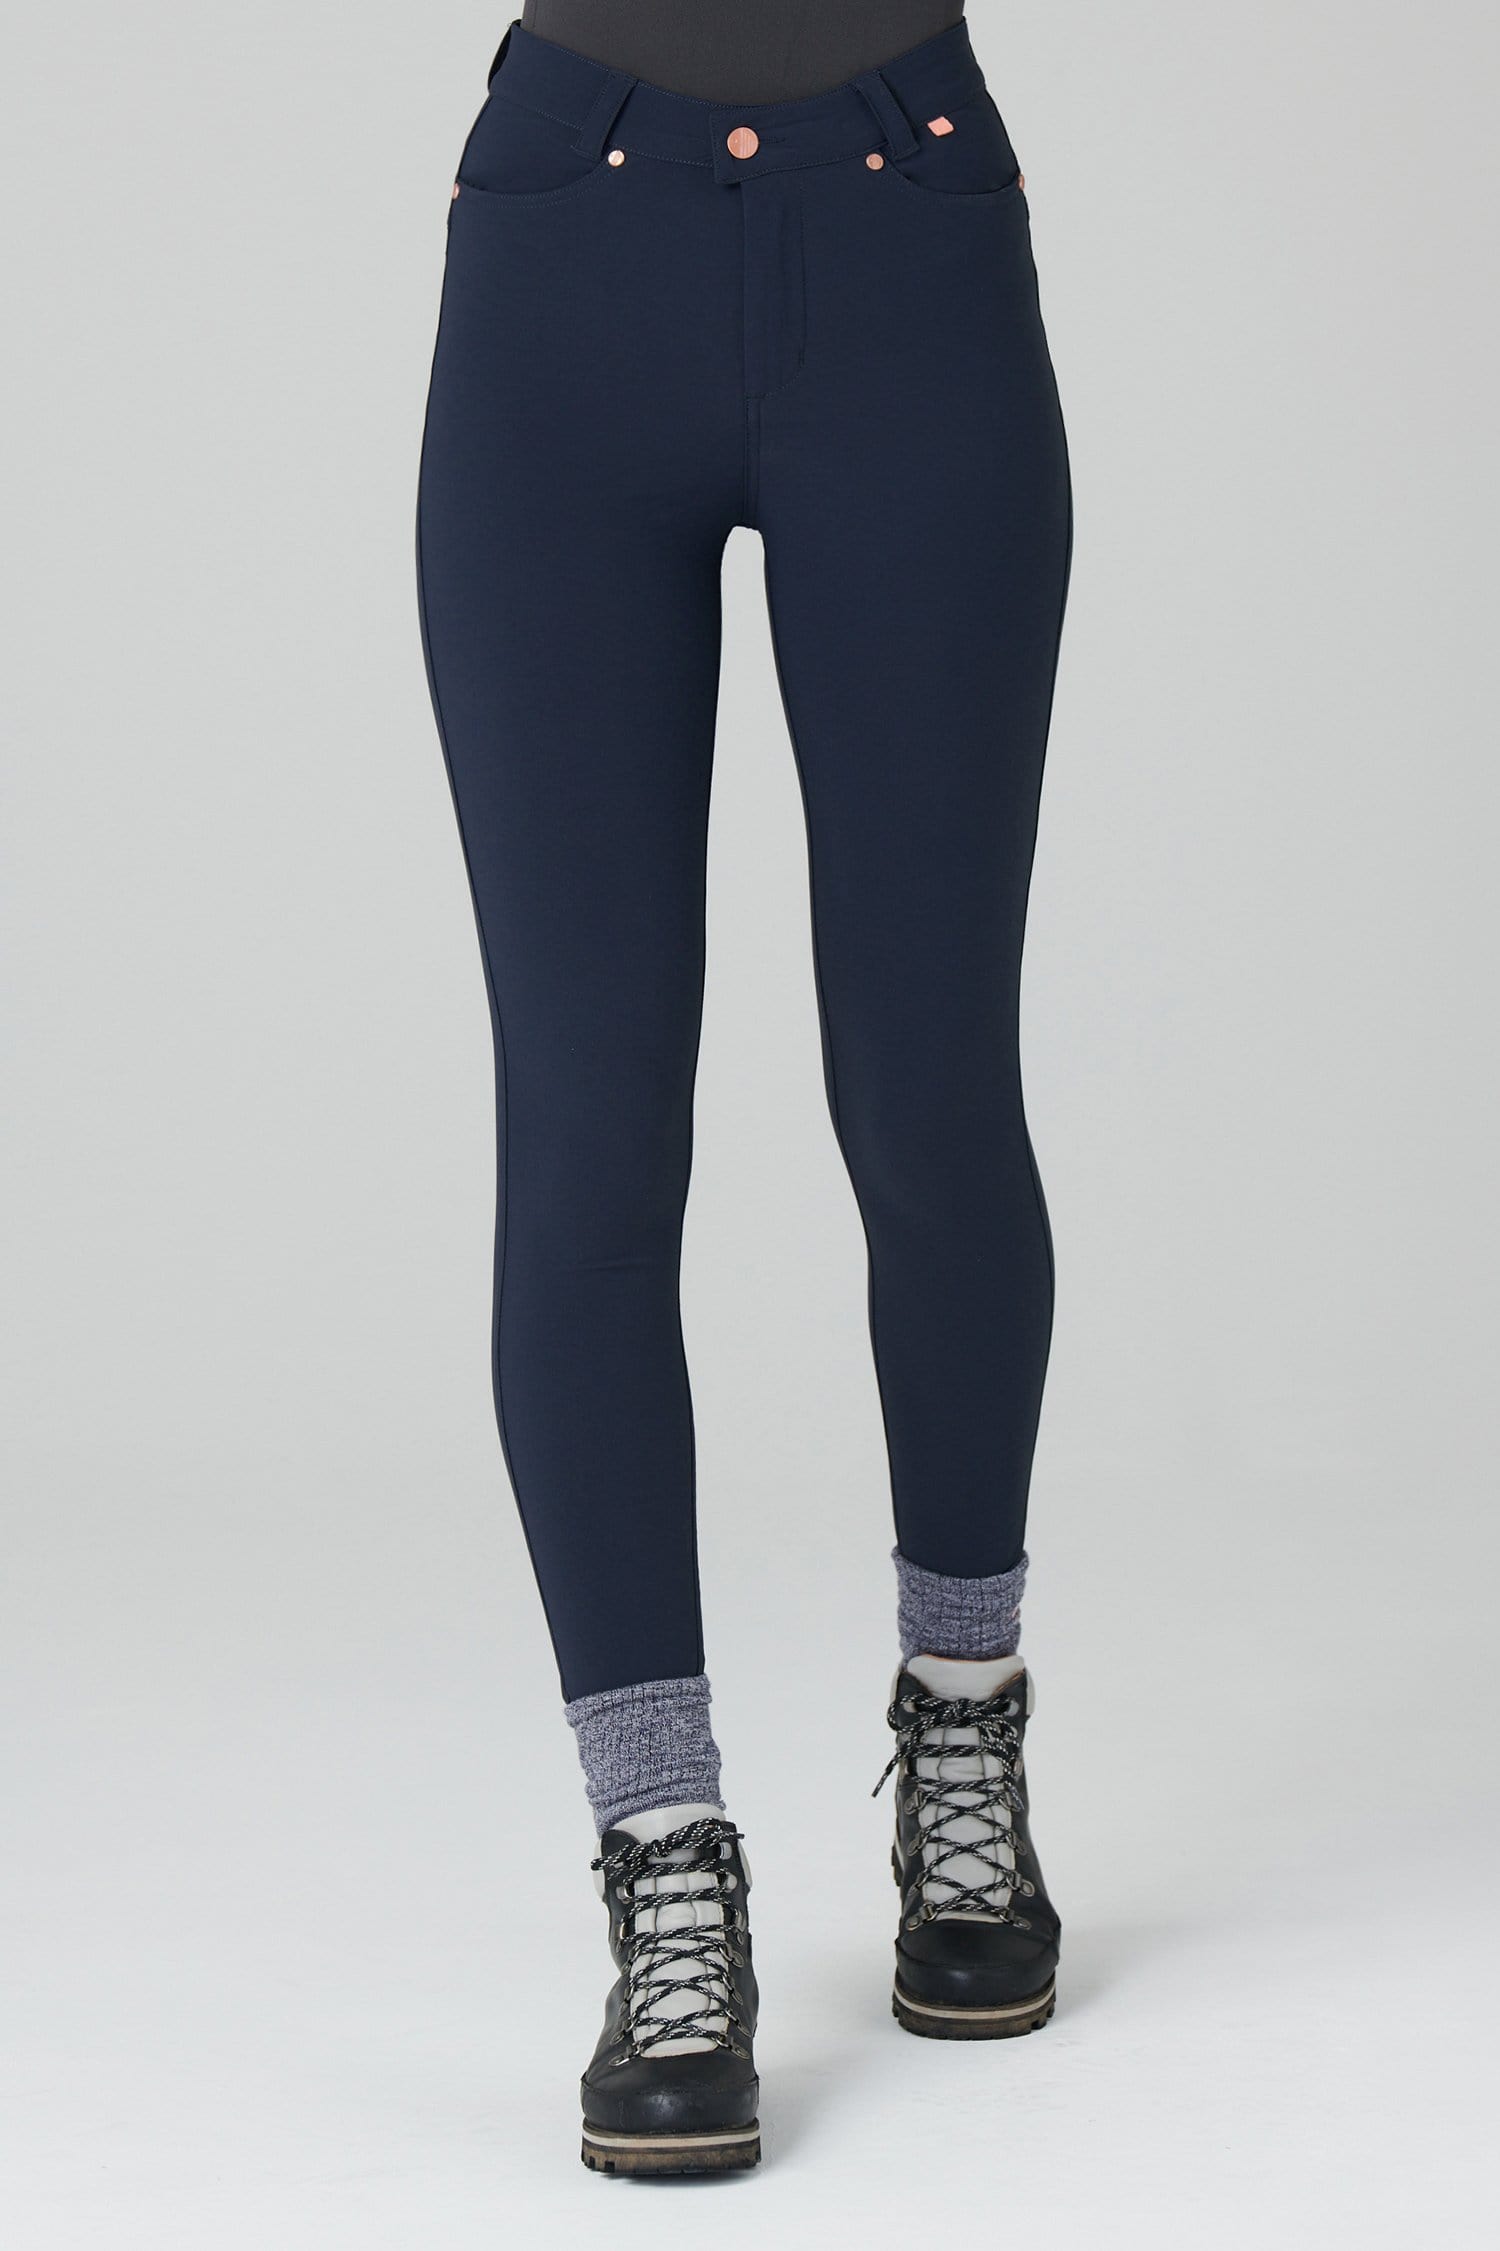 Thermal Skinny Outdoor Trousers - Deep Navy - 30r / Uk12 - Womens - Acai Outdoorwear